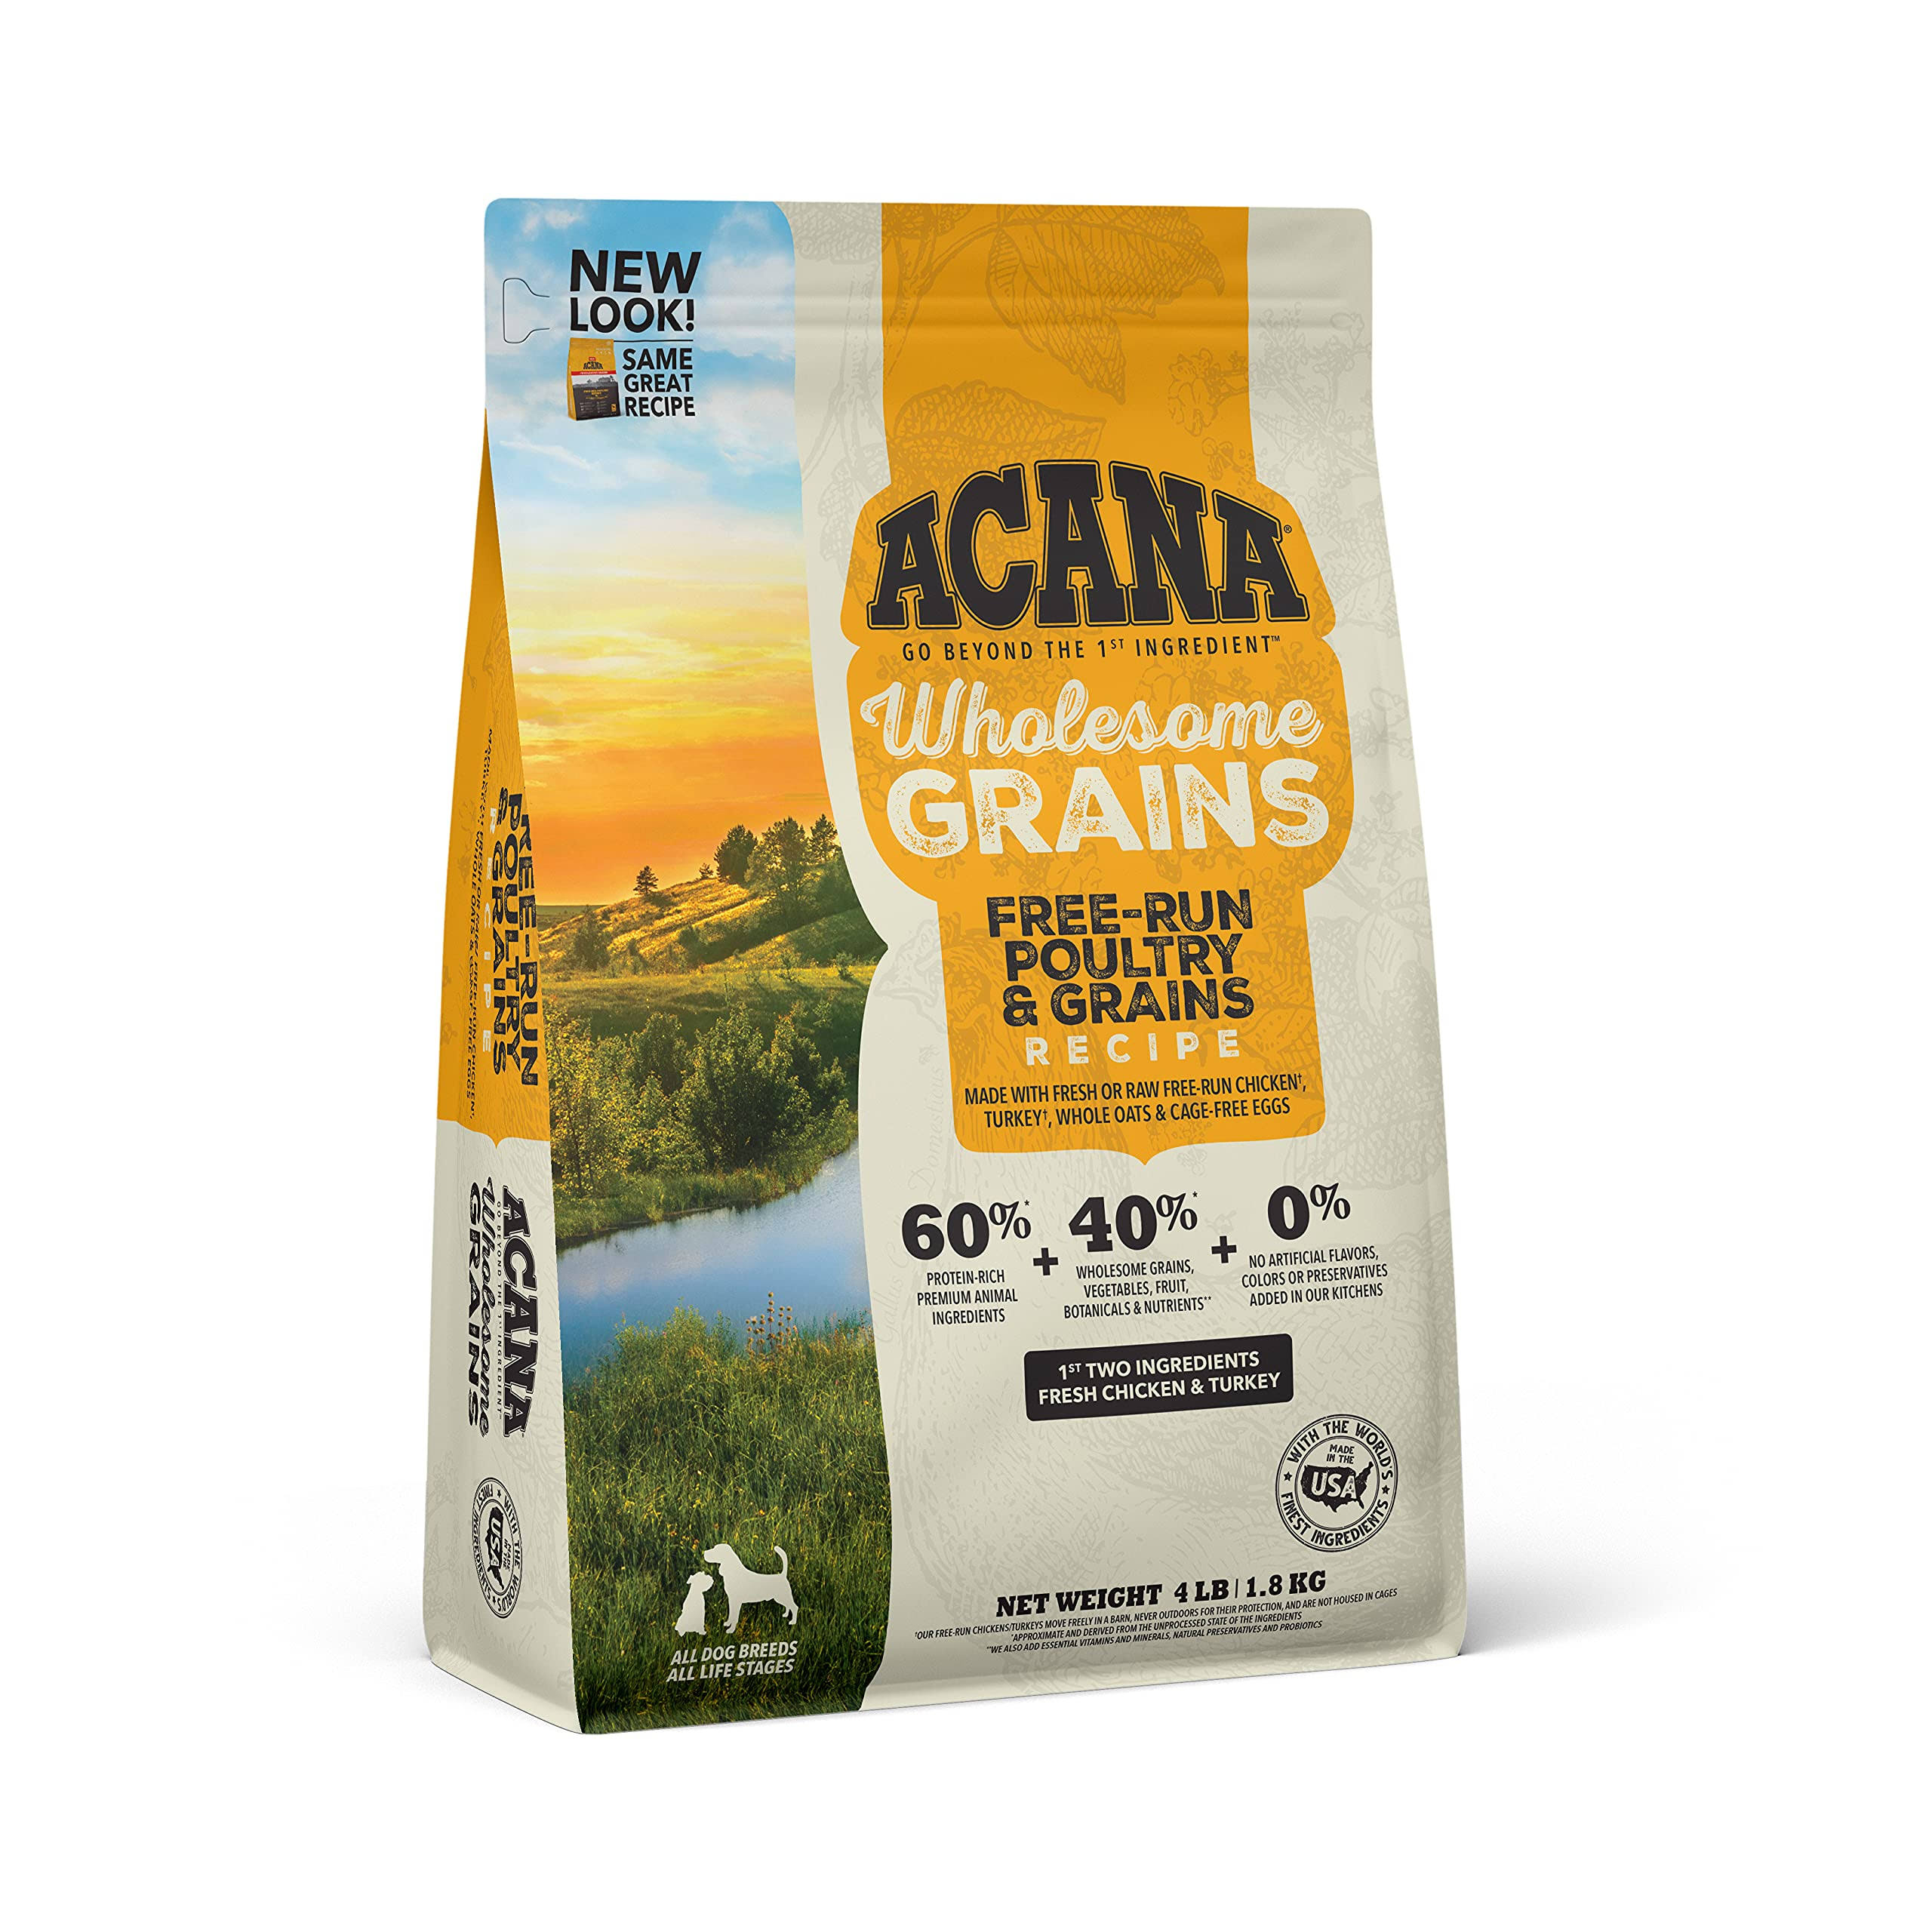 Acana - Free-Run Poultry Wholesome Grains Recipe Dry Dog Food 4 lb